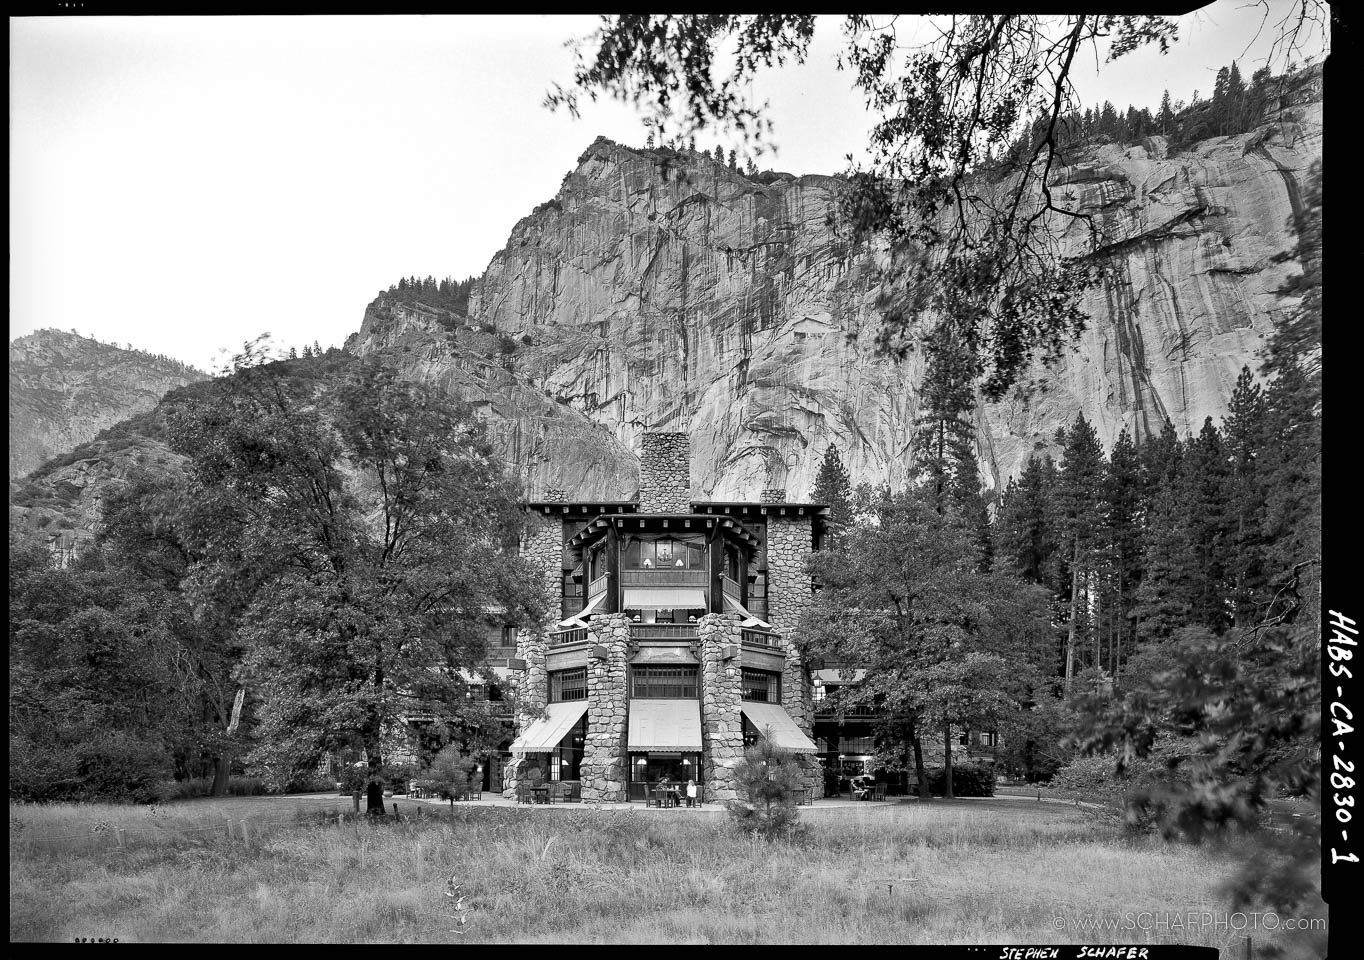 HABS Photograph of the Ahwahnee Hotel in Yosemite National Park